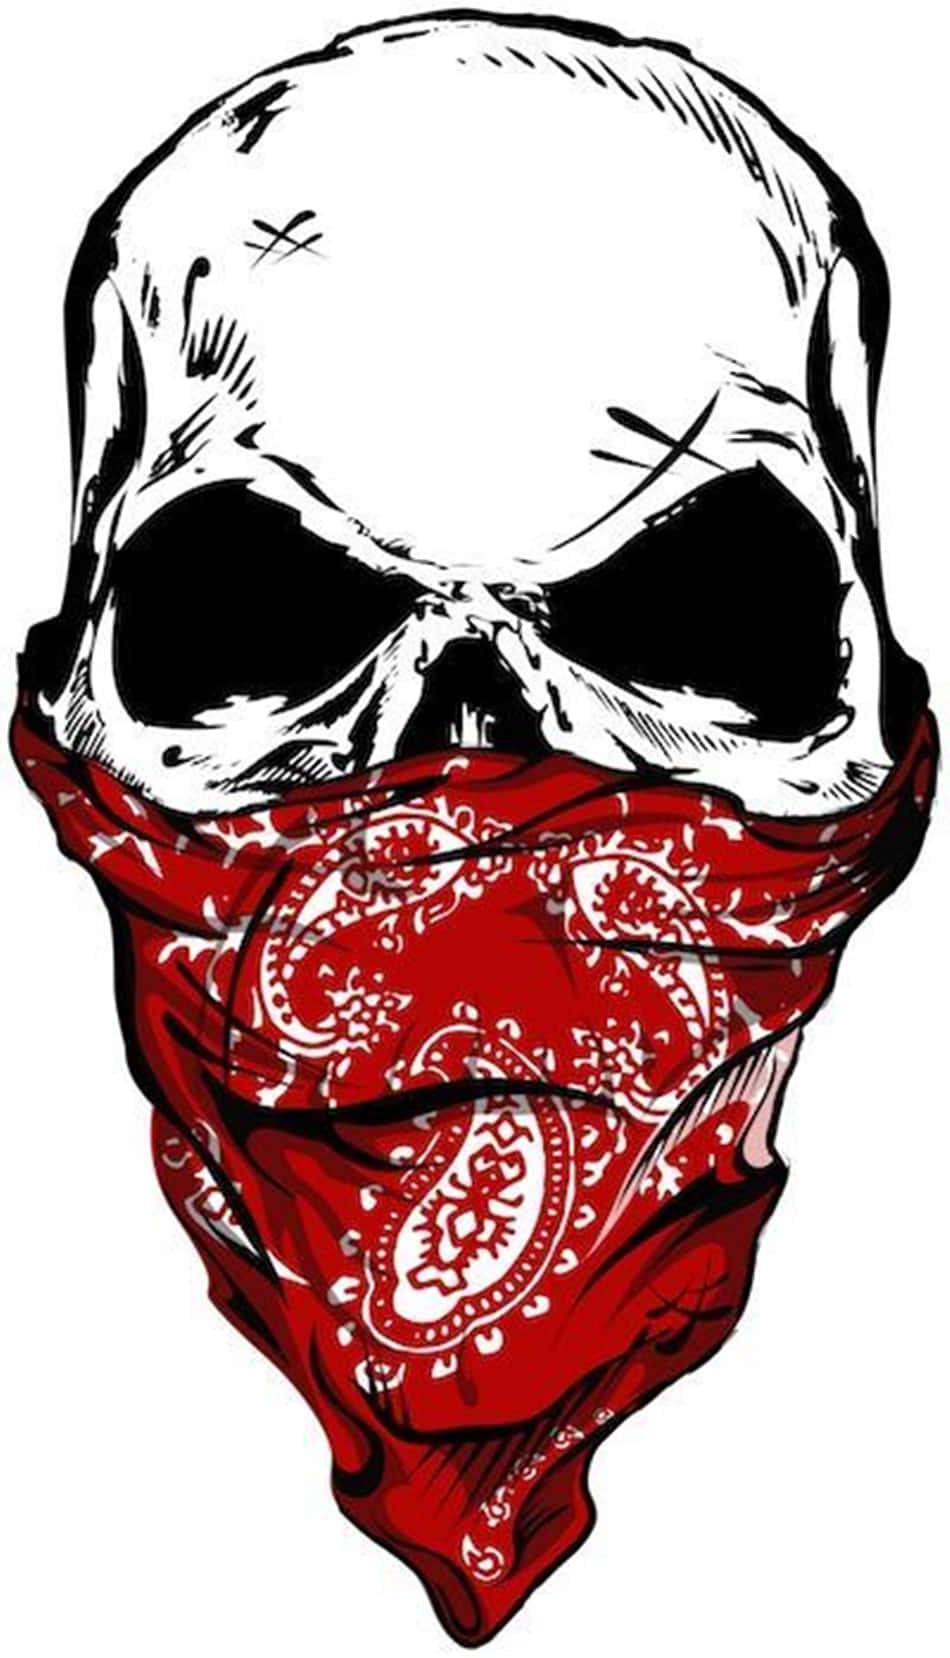 A Skull With A Red Bandana On His Head Wallpaper